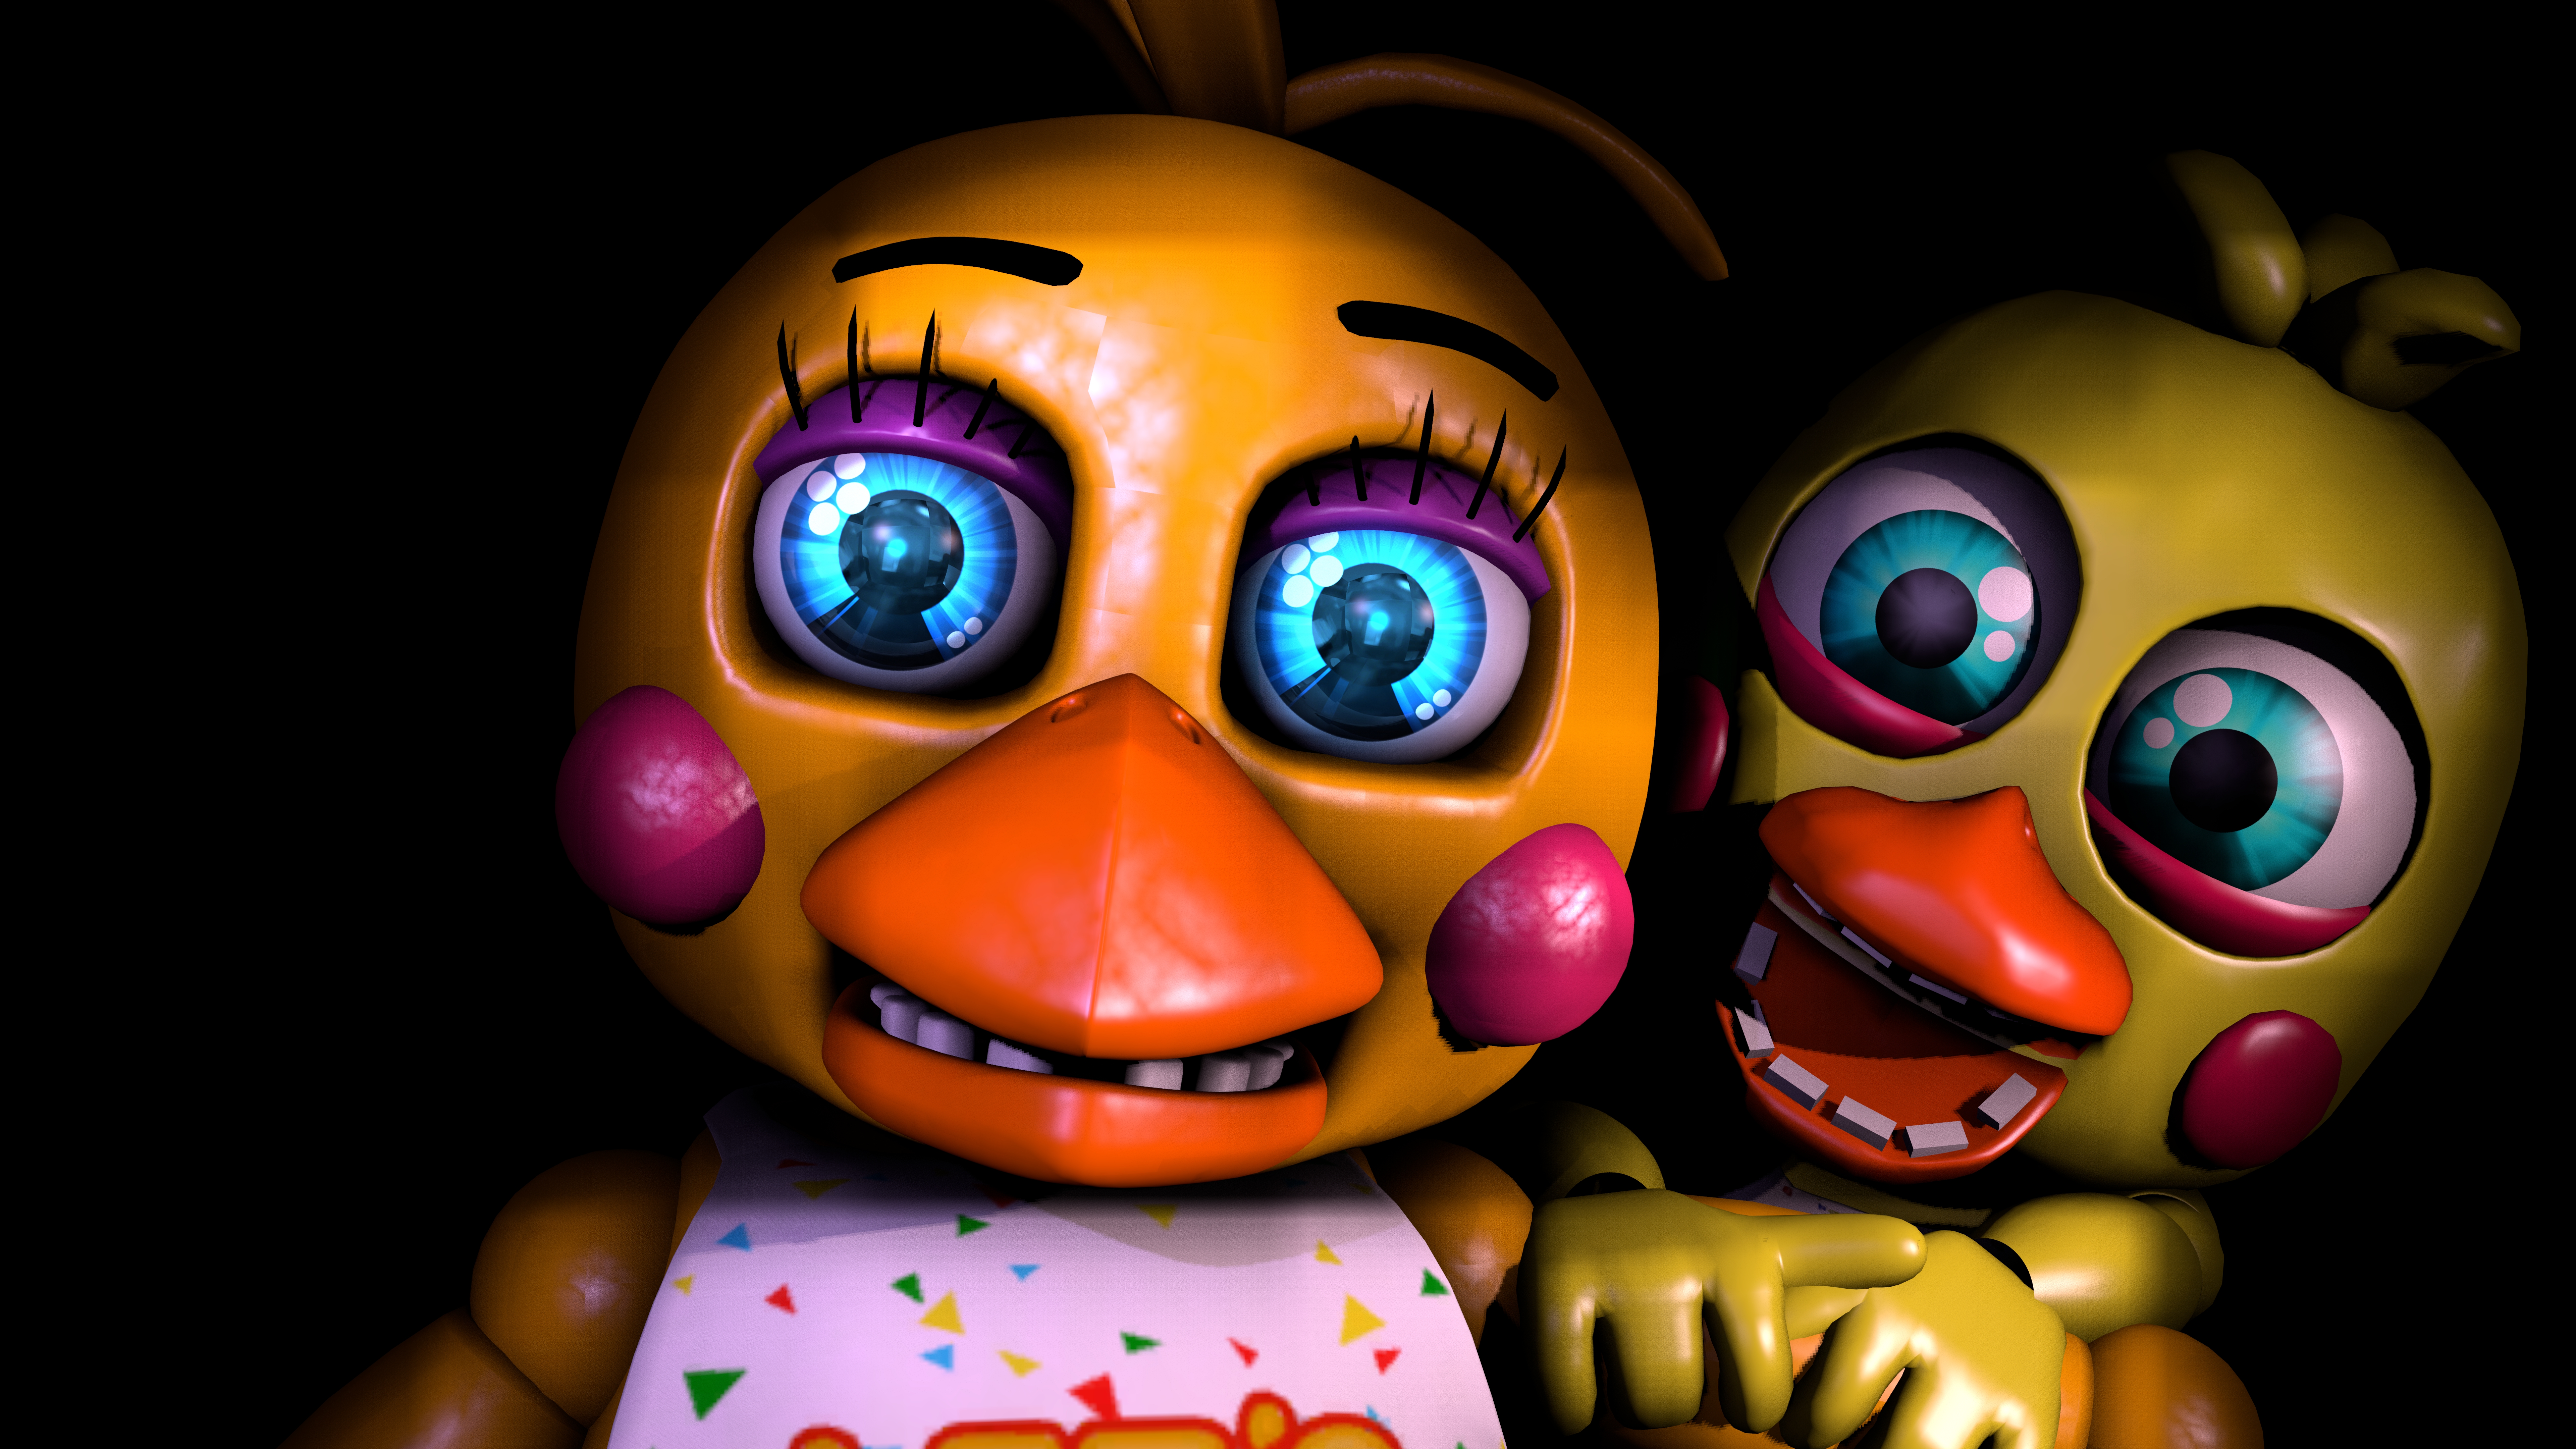 Funtime Chica (UCN Icon) by MisterioArg on DeviantArt